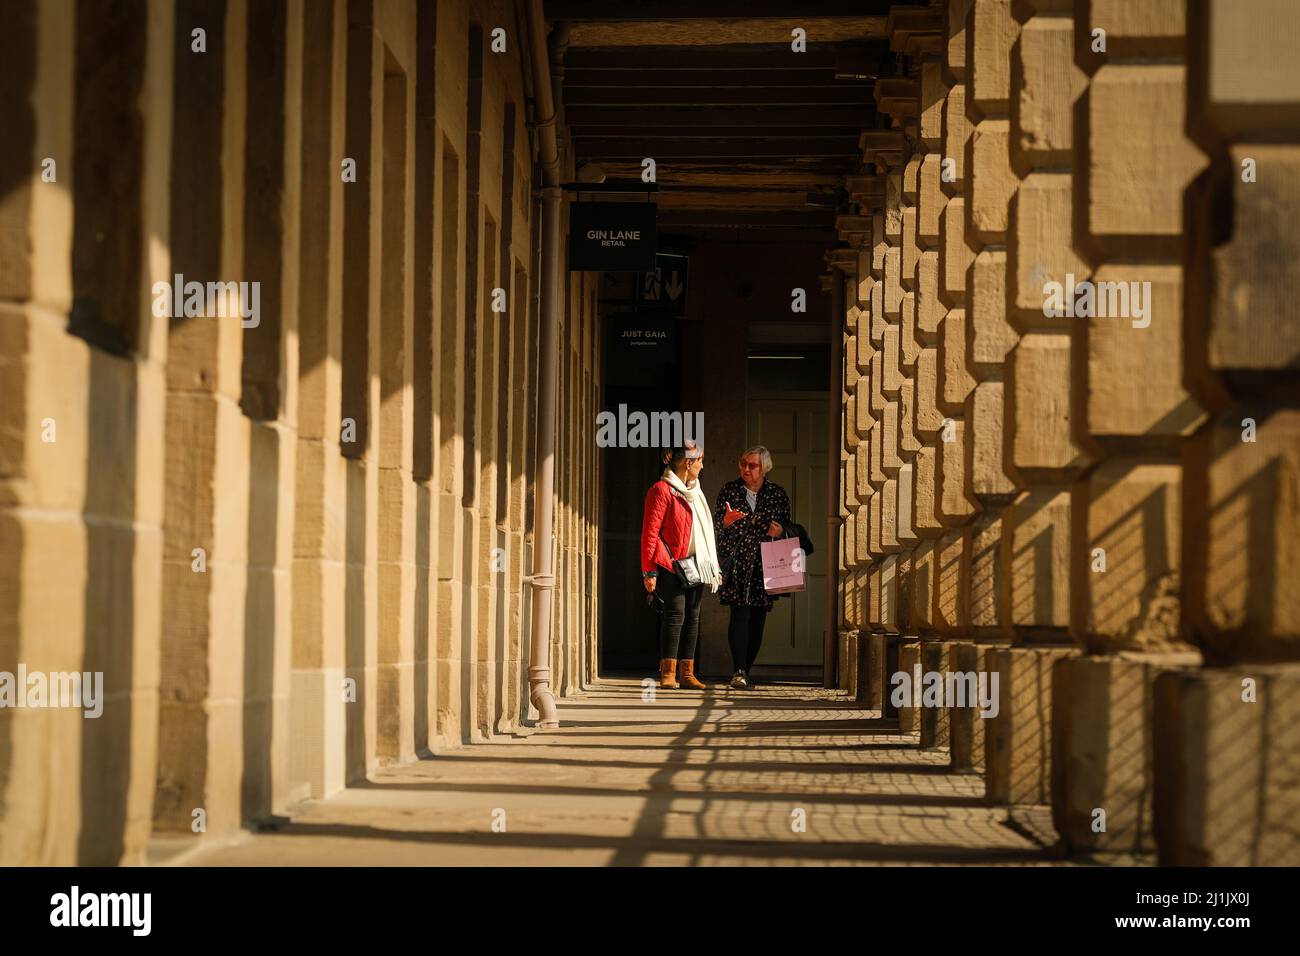 Halifax, West Yorkshire, UK. Shoppers at The Piece Hall. Stock Photo